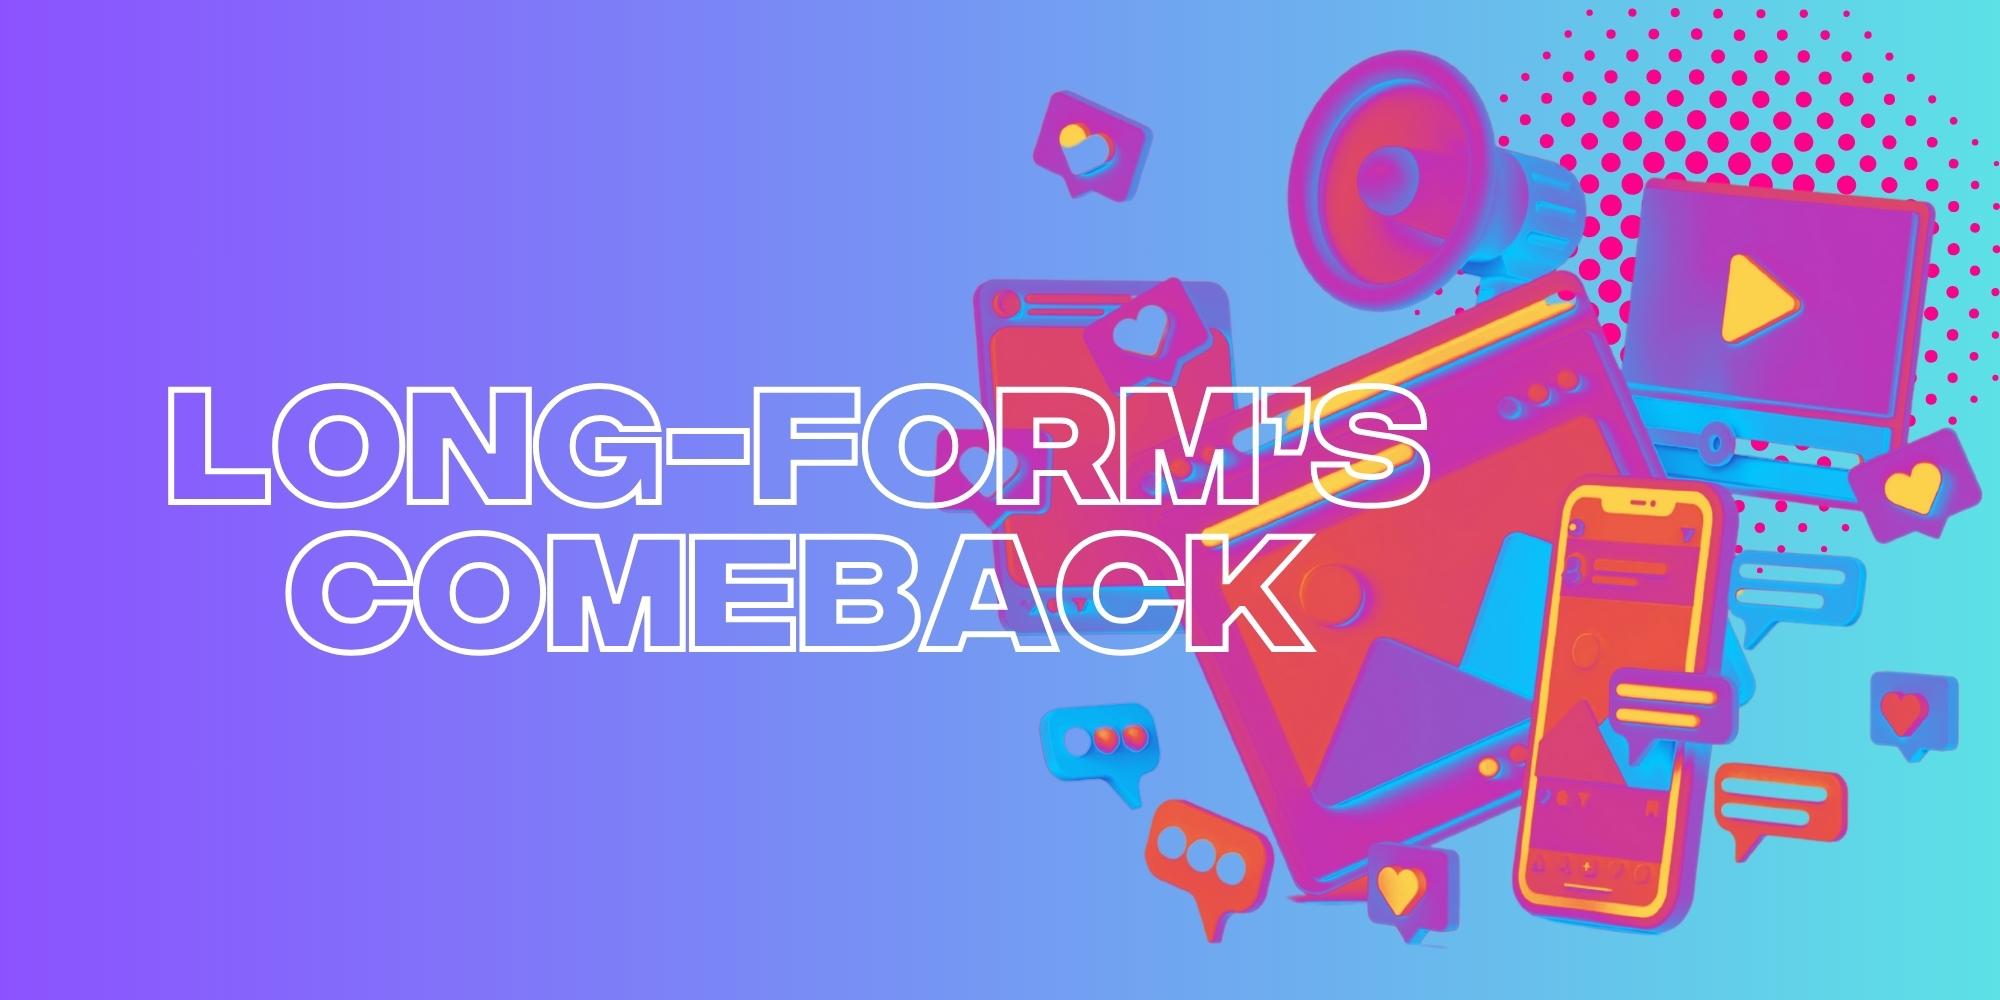 Is Long-Form Content Making A Comeback?